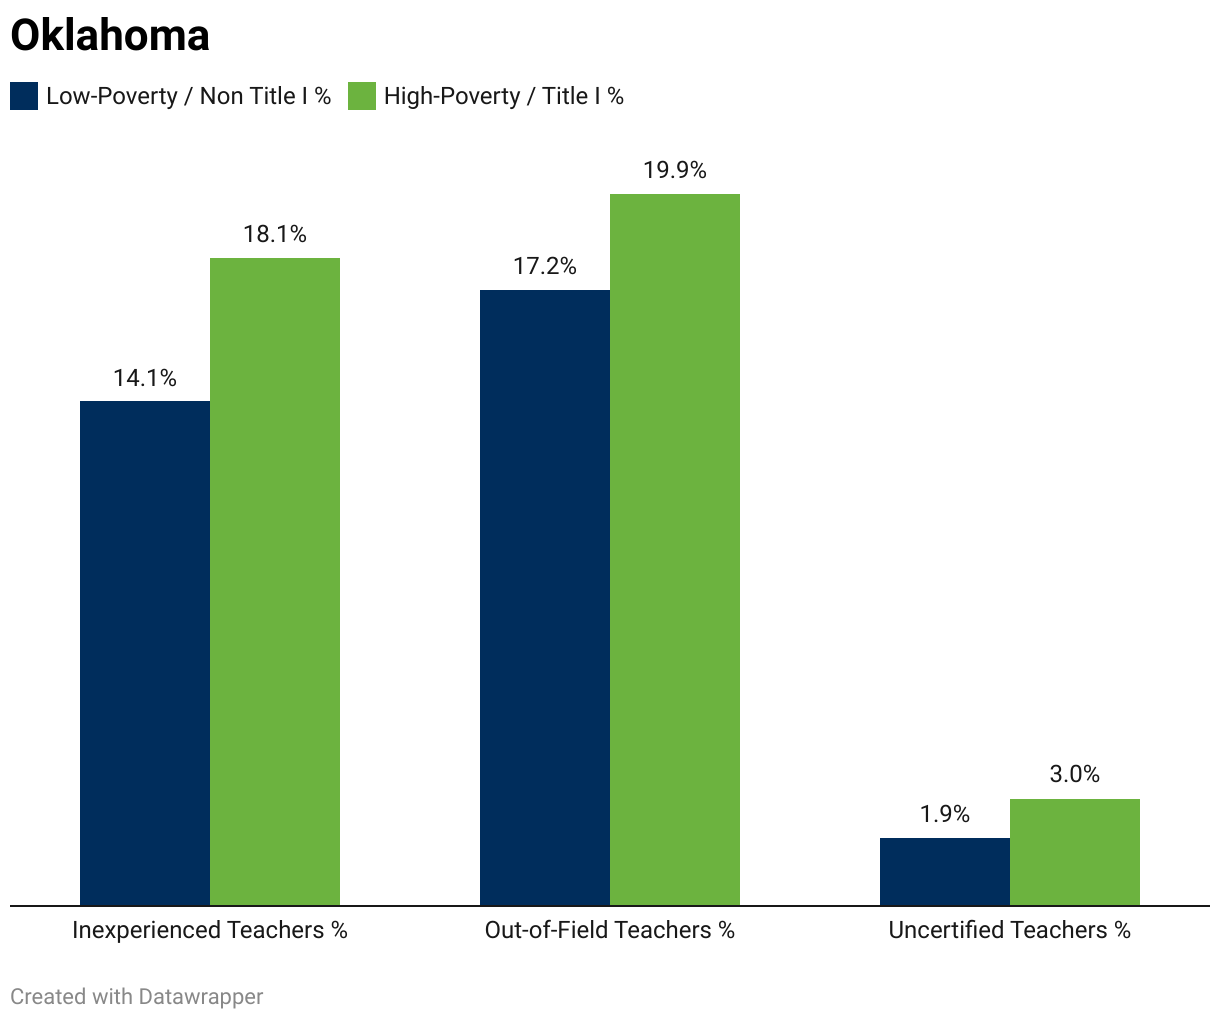 A grouped column chart showing the percentage of inexperienced, out-of-field and uncertified teachers in low-poverty non-Title I schools vs. higher-poverty Title I schools IN OKLAHOMA.